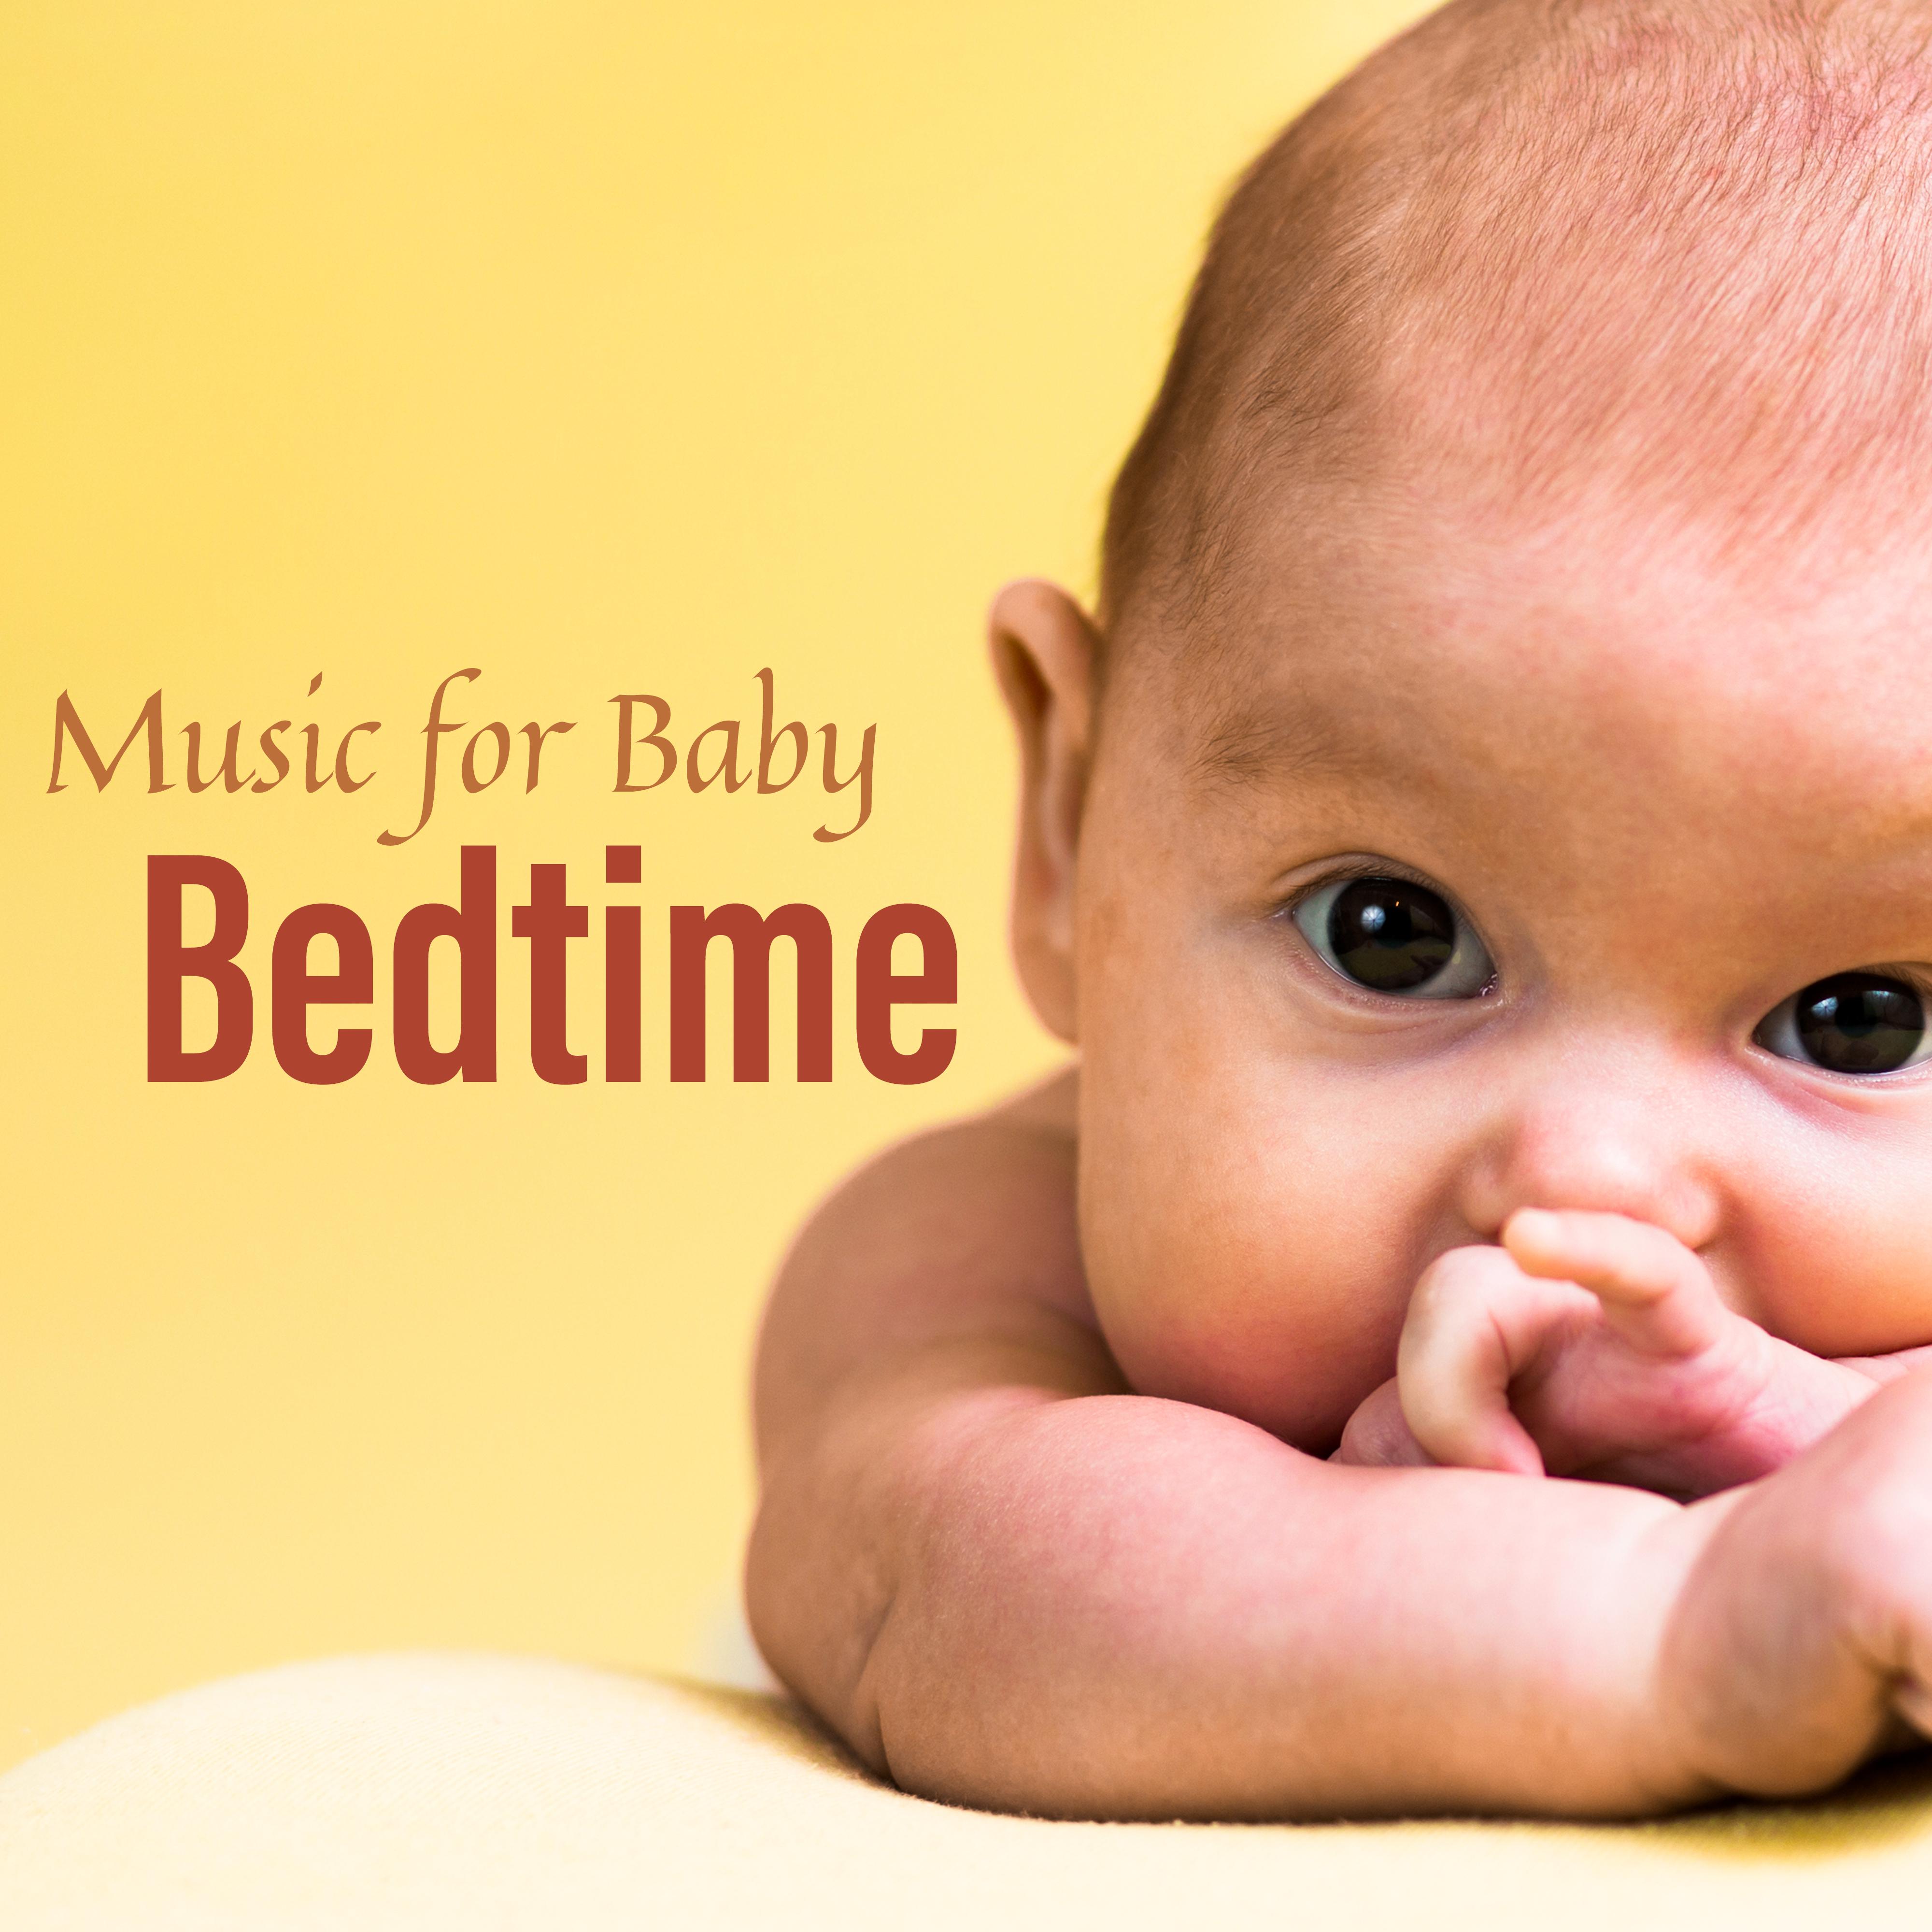 Music for Baby Bedtime